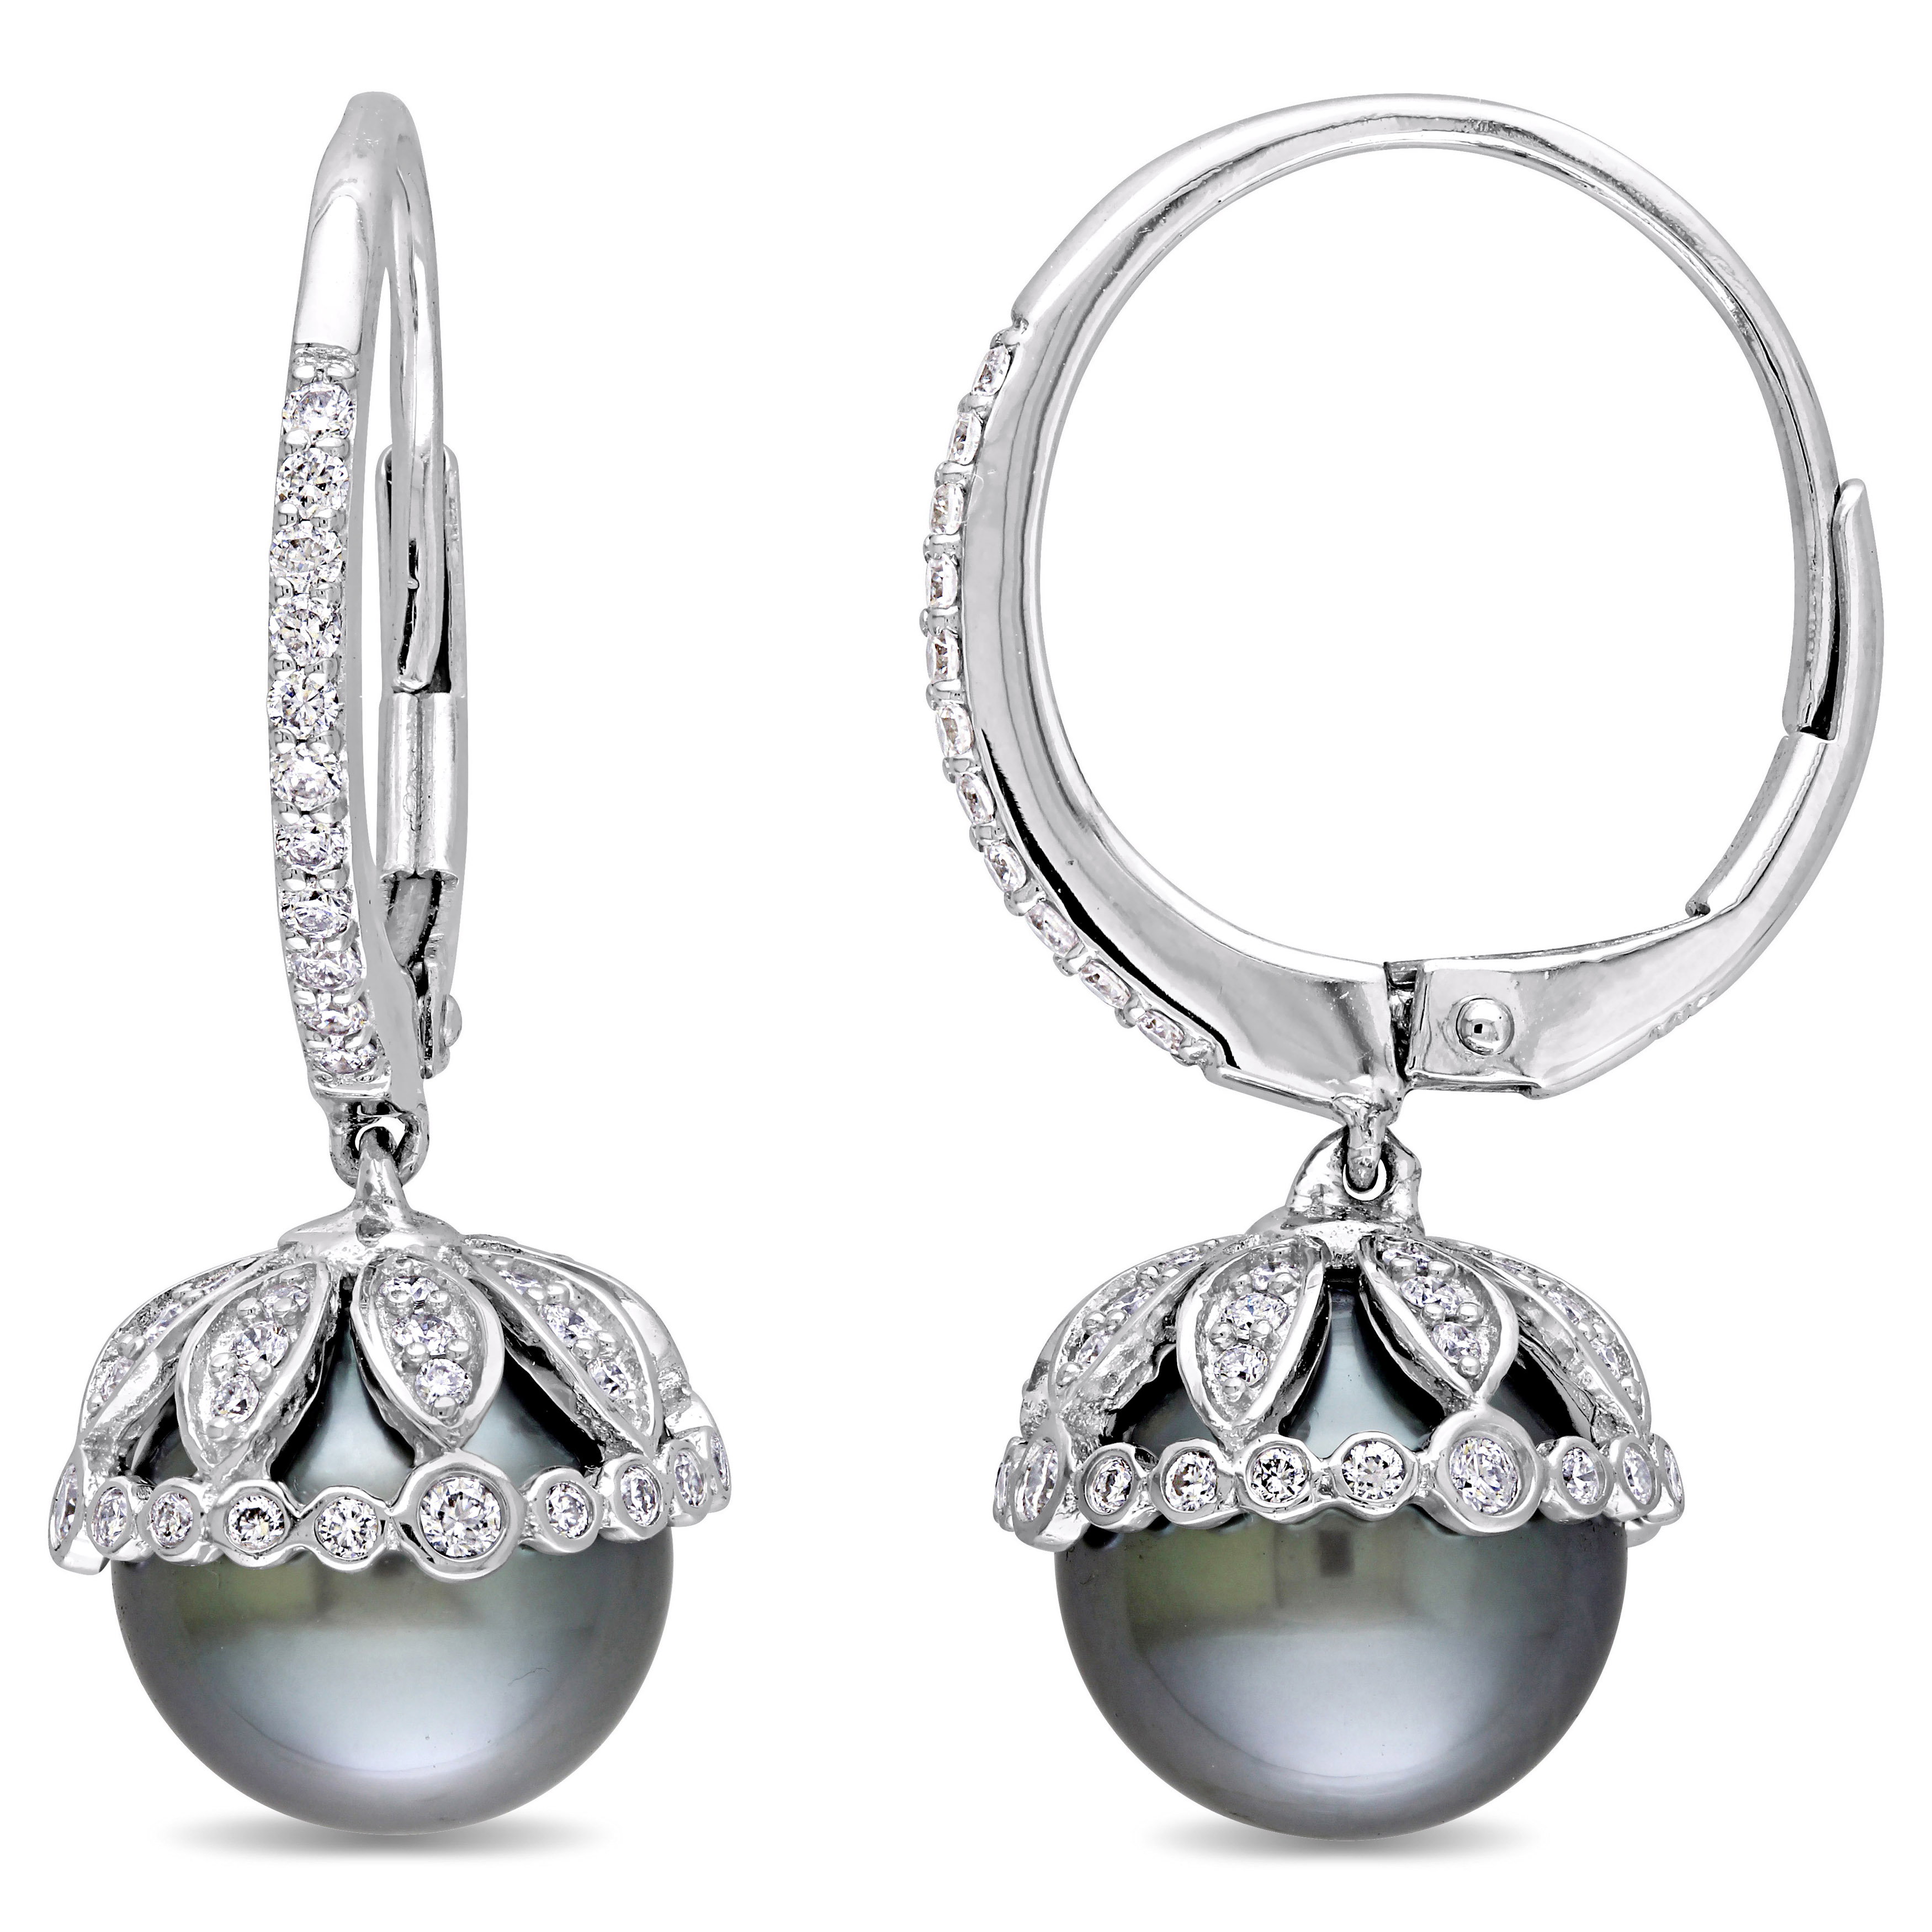 9-9.5 MM Black Tahitian Cultured Pearl and 1/2 CT TW Diamond Floral Drop Leverback Earrings in 14k White Gold